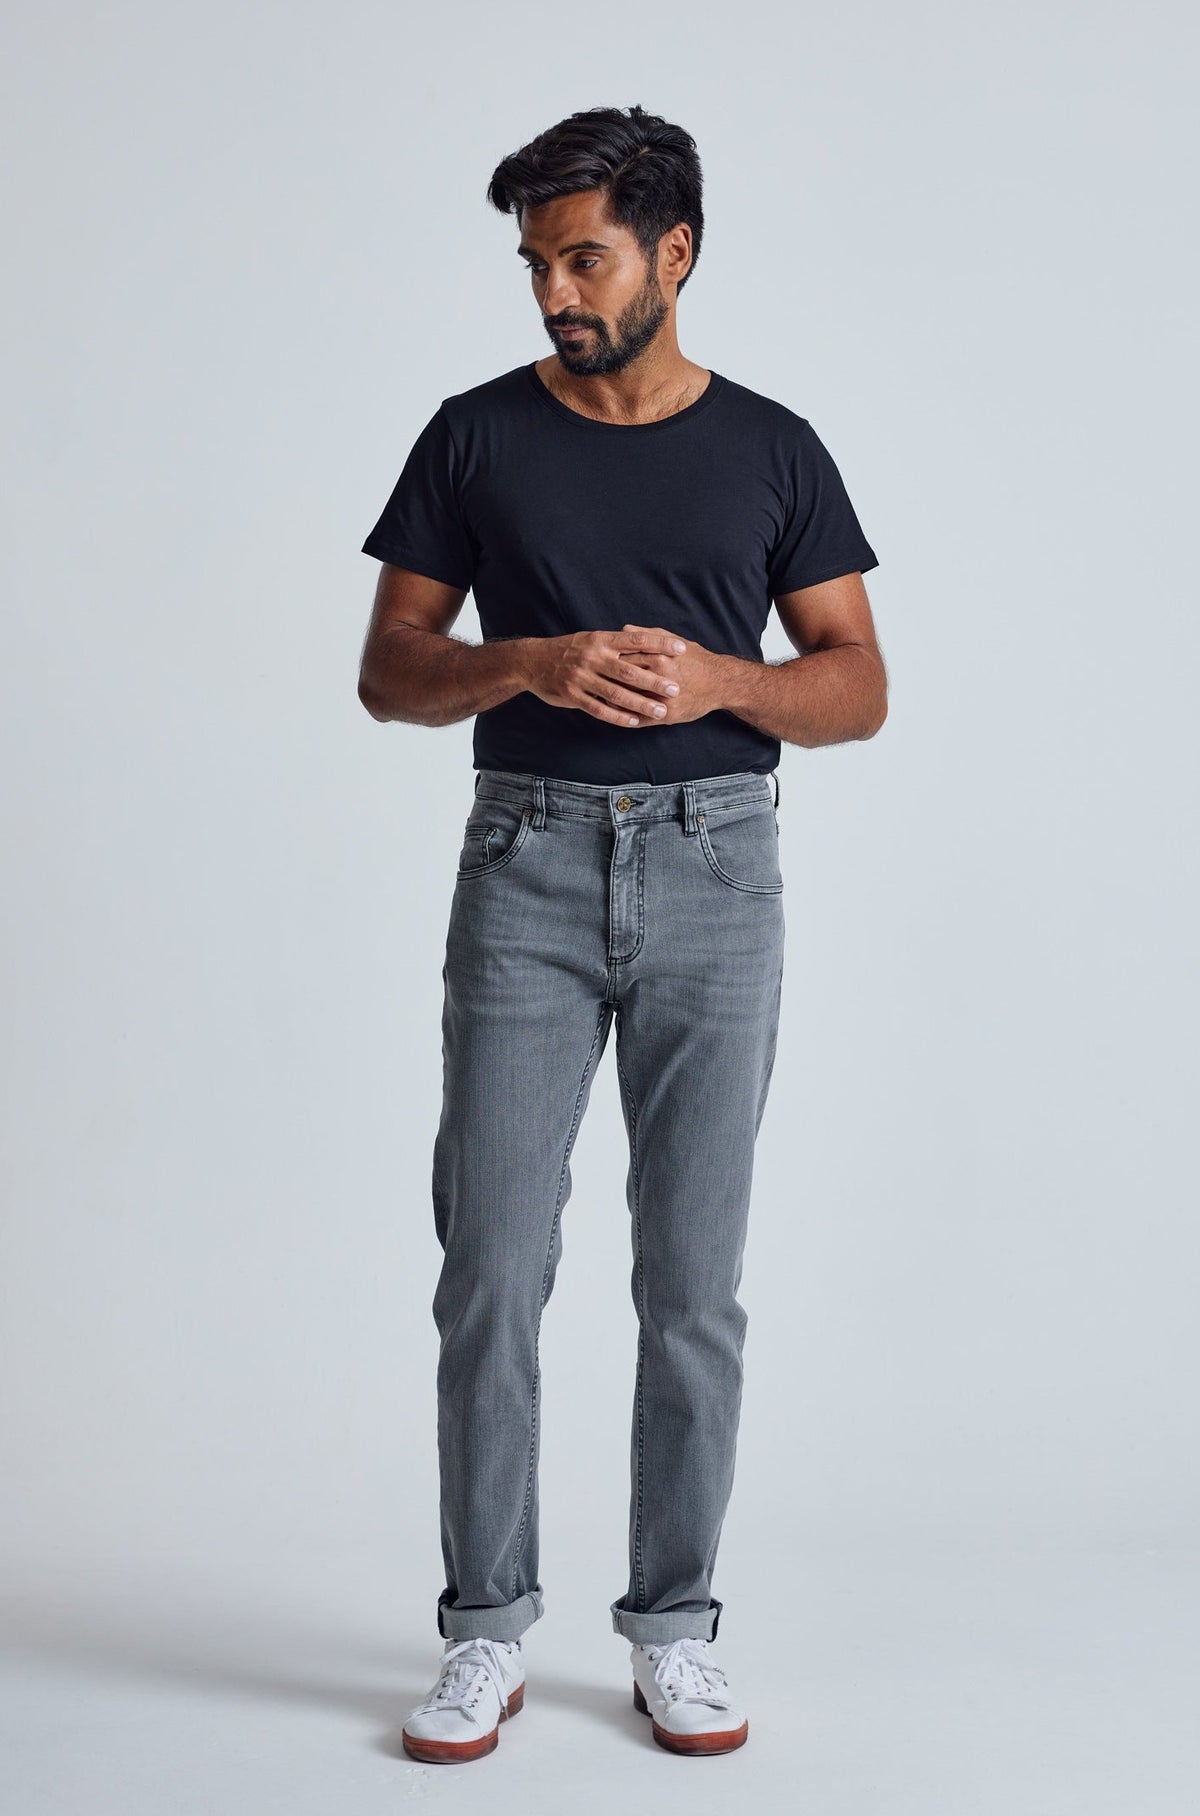 Silver Fox Miles Slim Fit Jeans - GOTS Certified Organic Cotton and Recycled Polyester